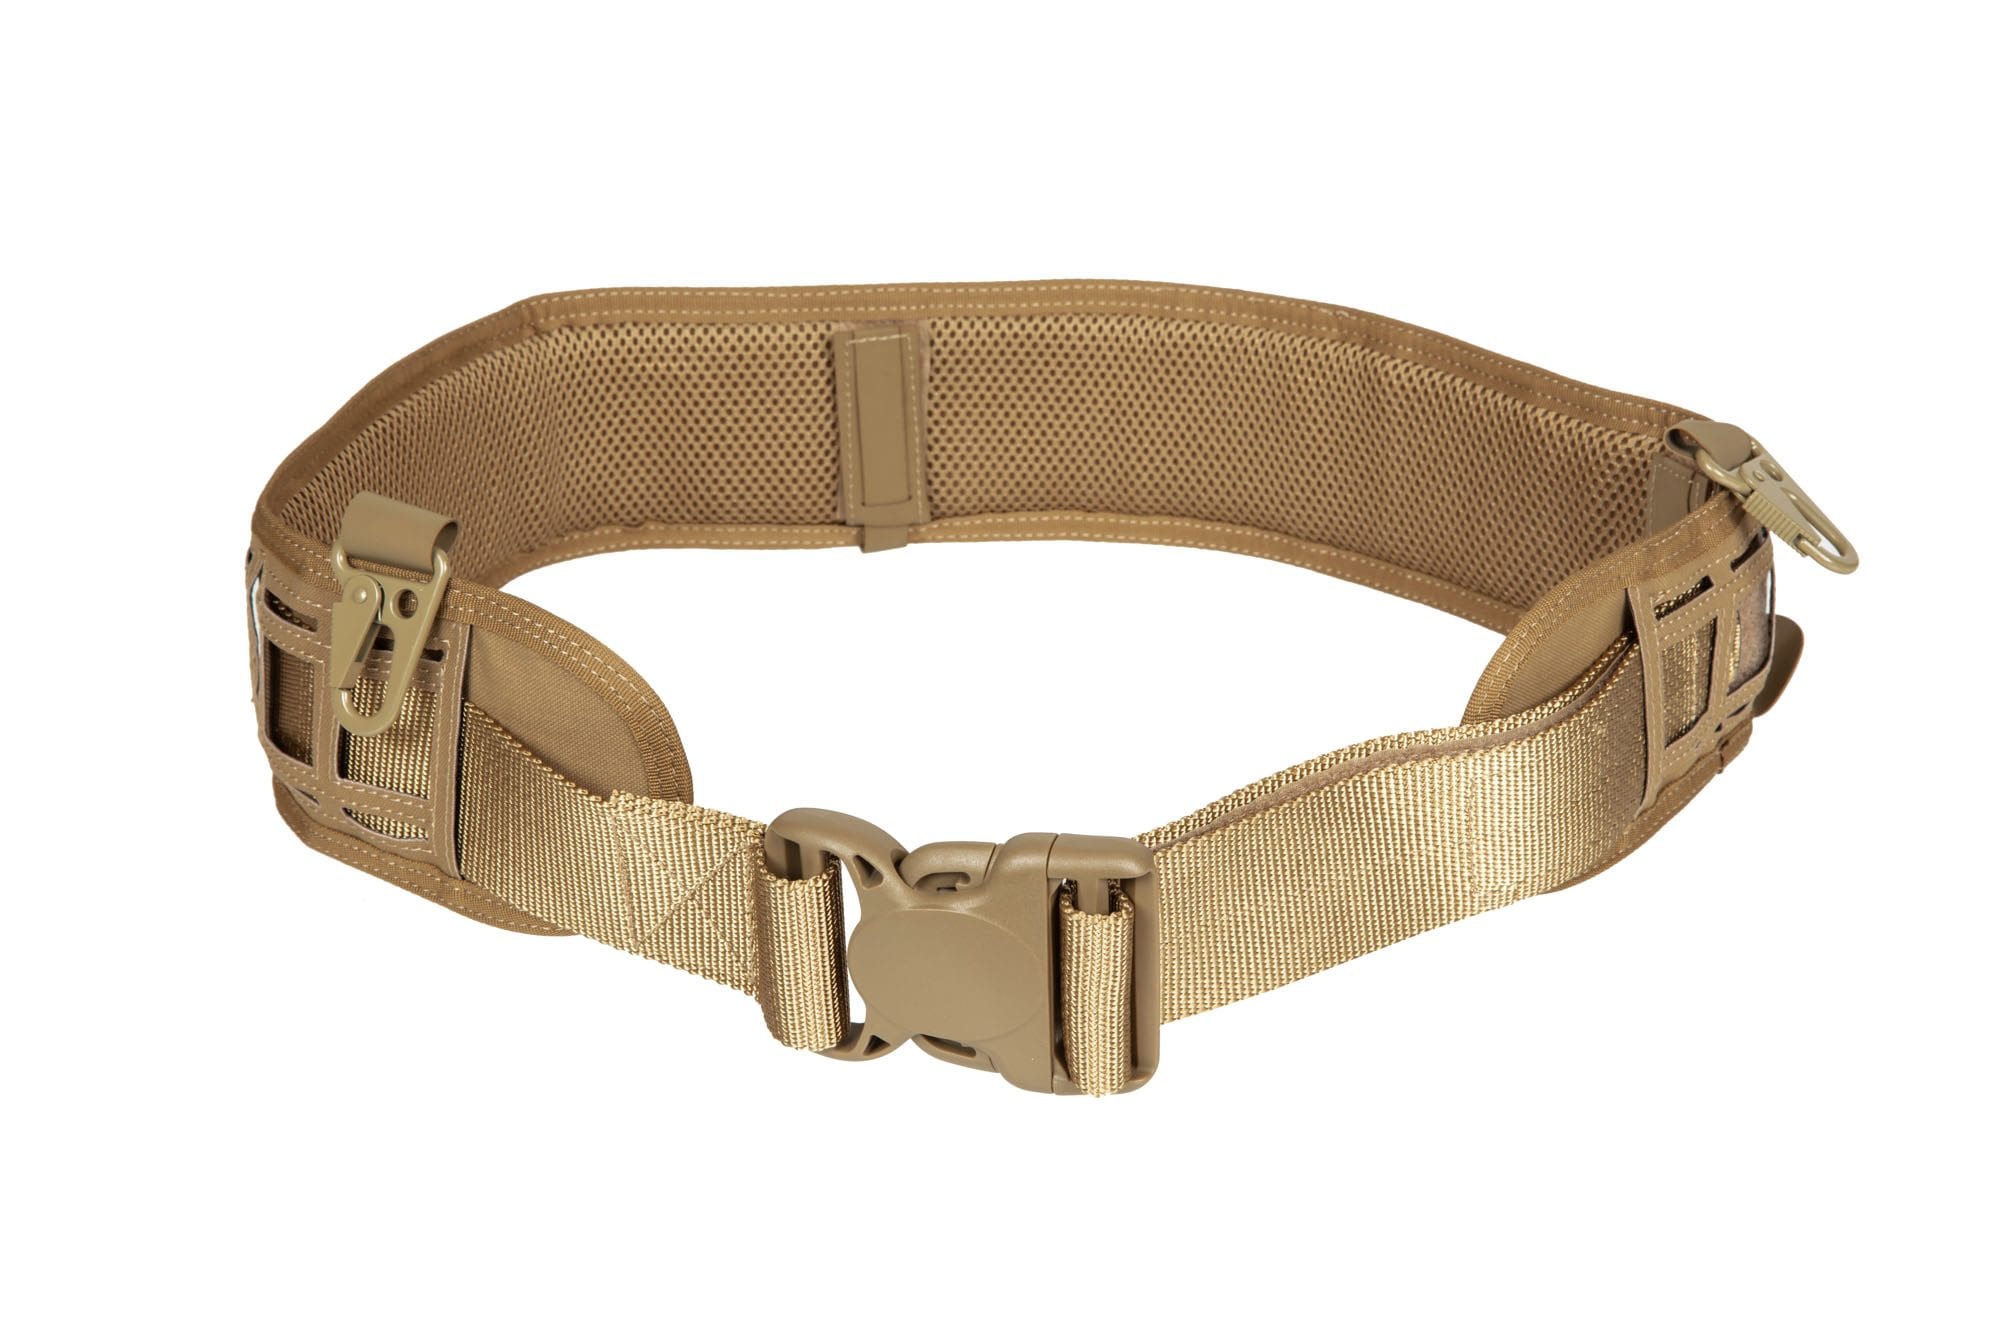 Tactical belt Laser-Cut Theri - Coyote Brown